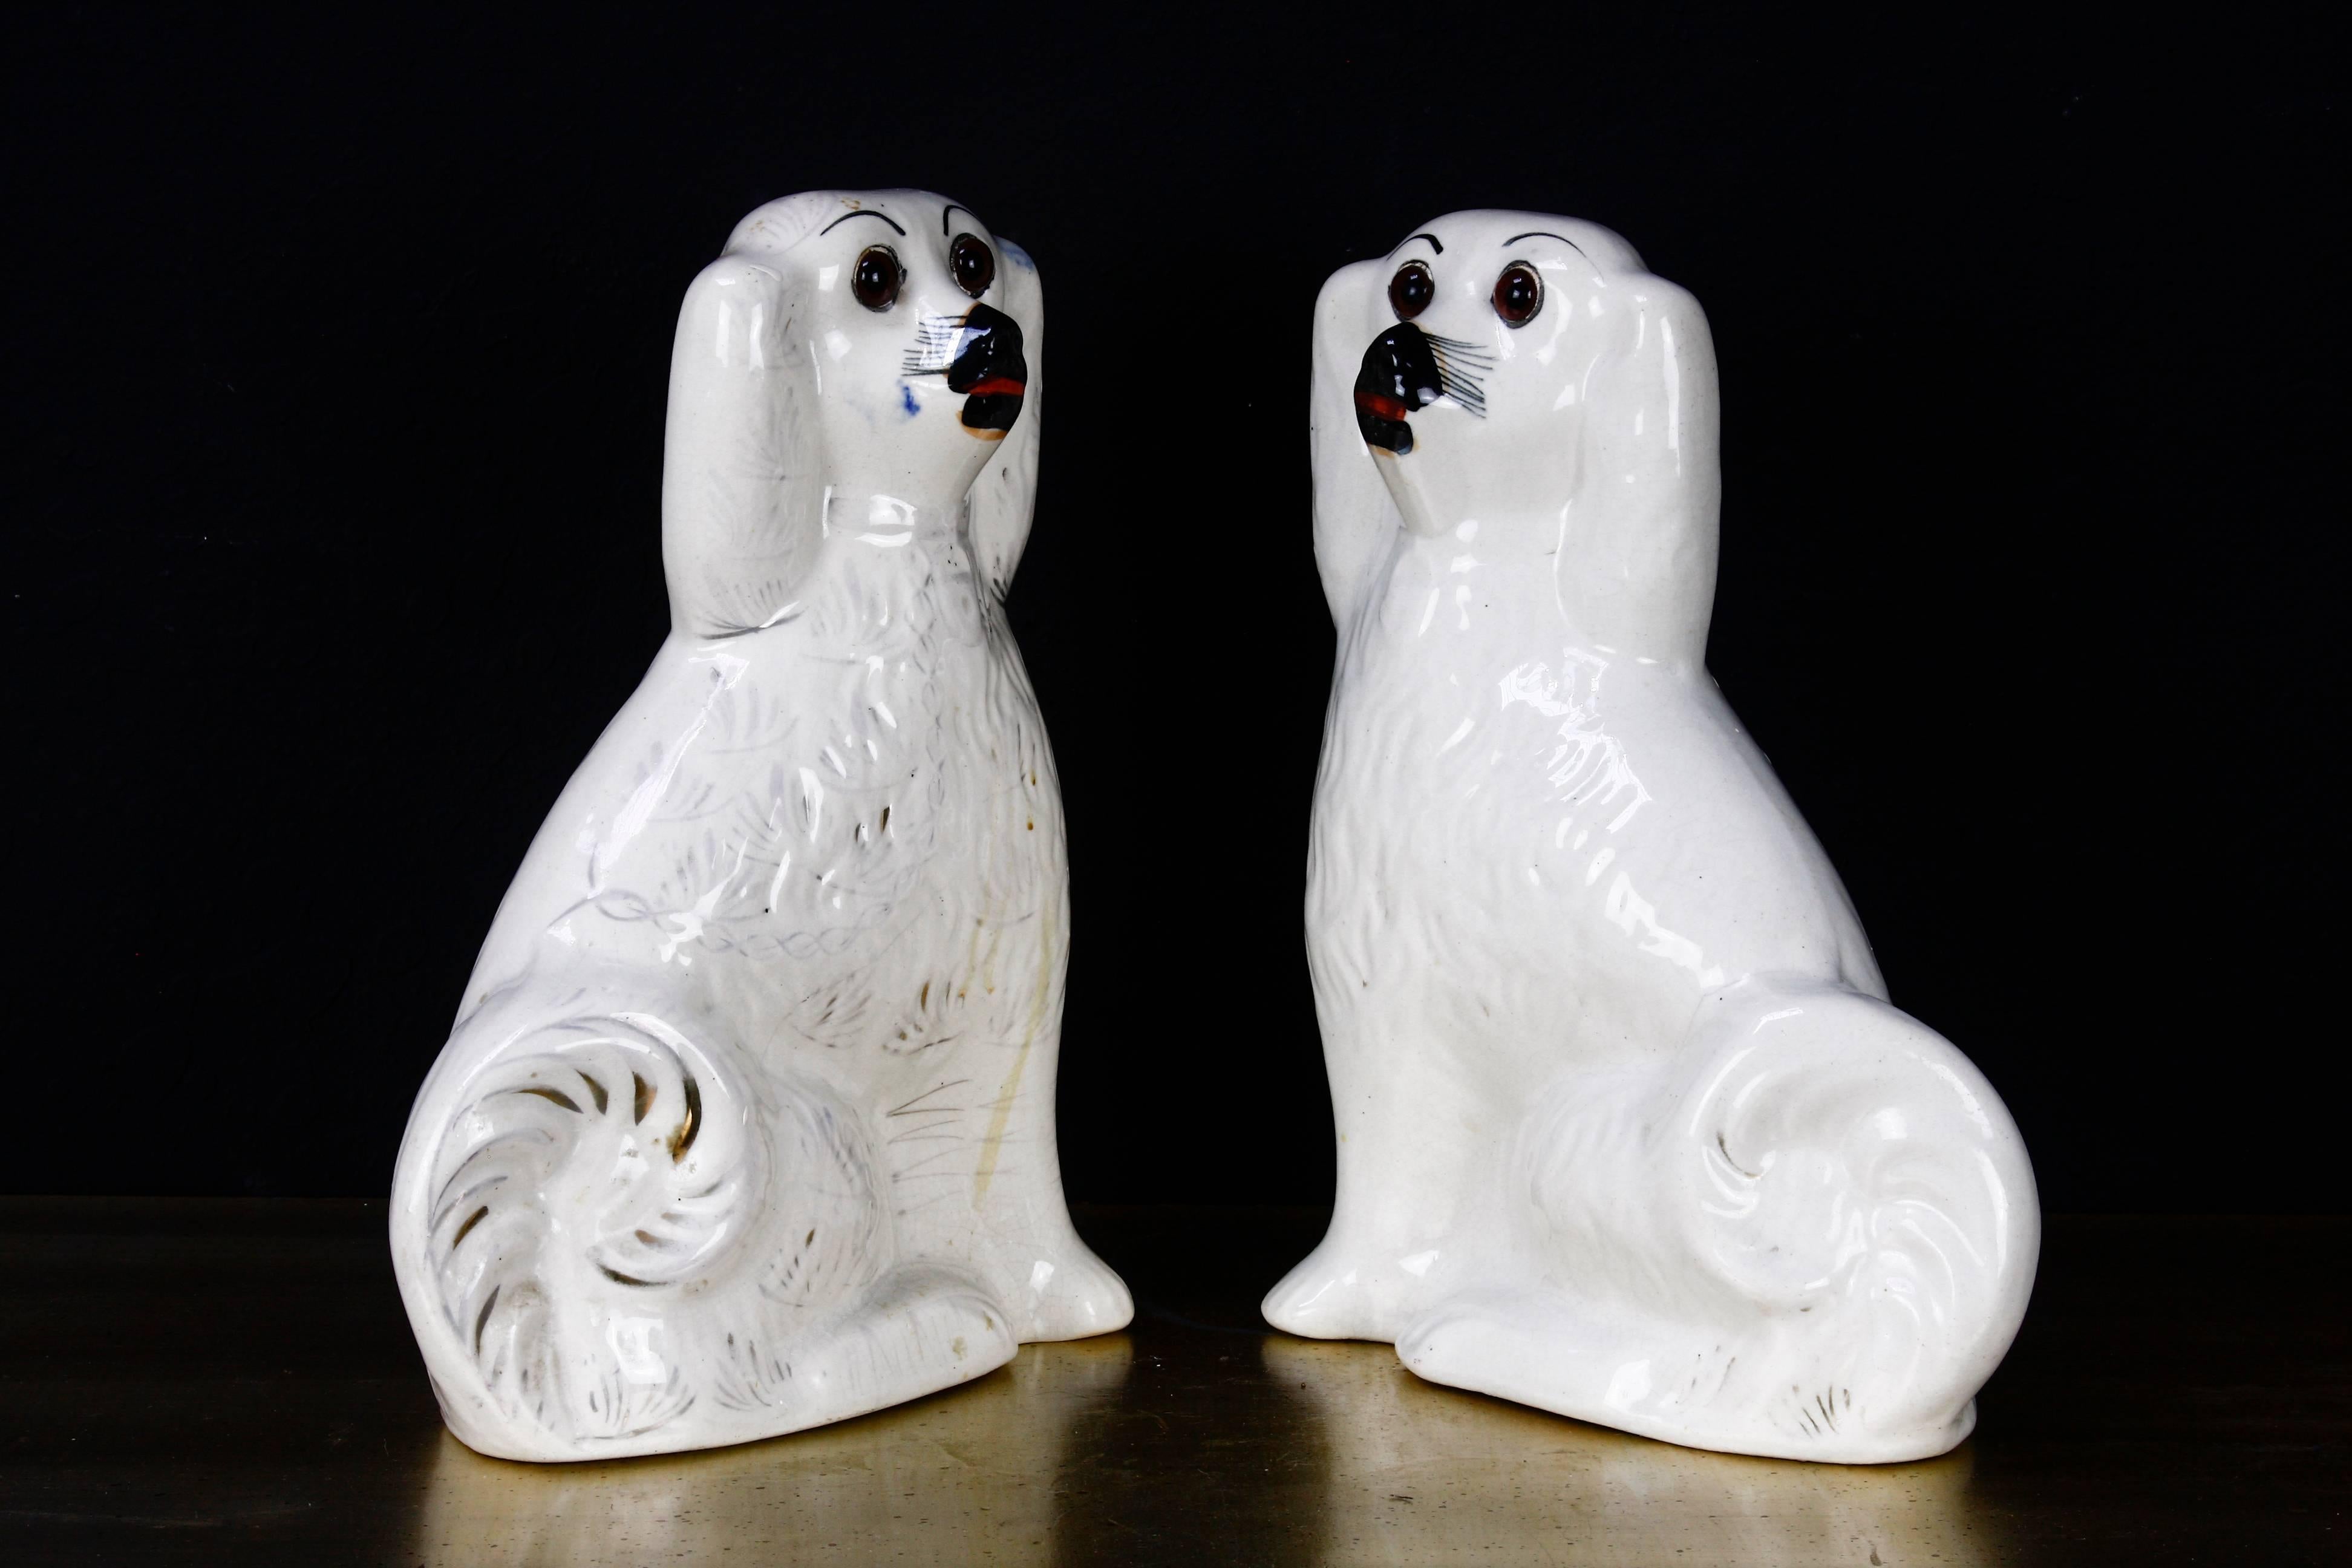 Delightful pair of English Staffordshire white glazed ceramic spaniel dogs. Featuring a white craquelure finish with nearly all gilt decoration faded away. Seated with curled tails and glass eyes.